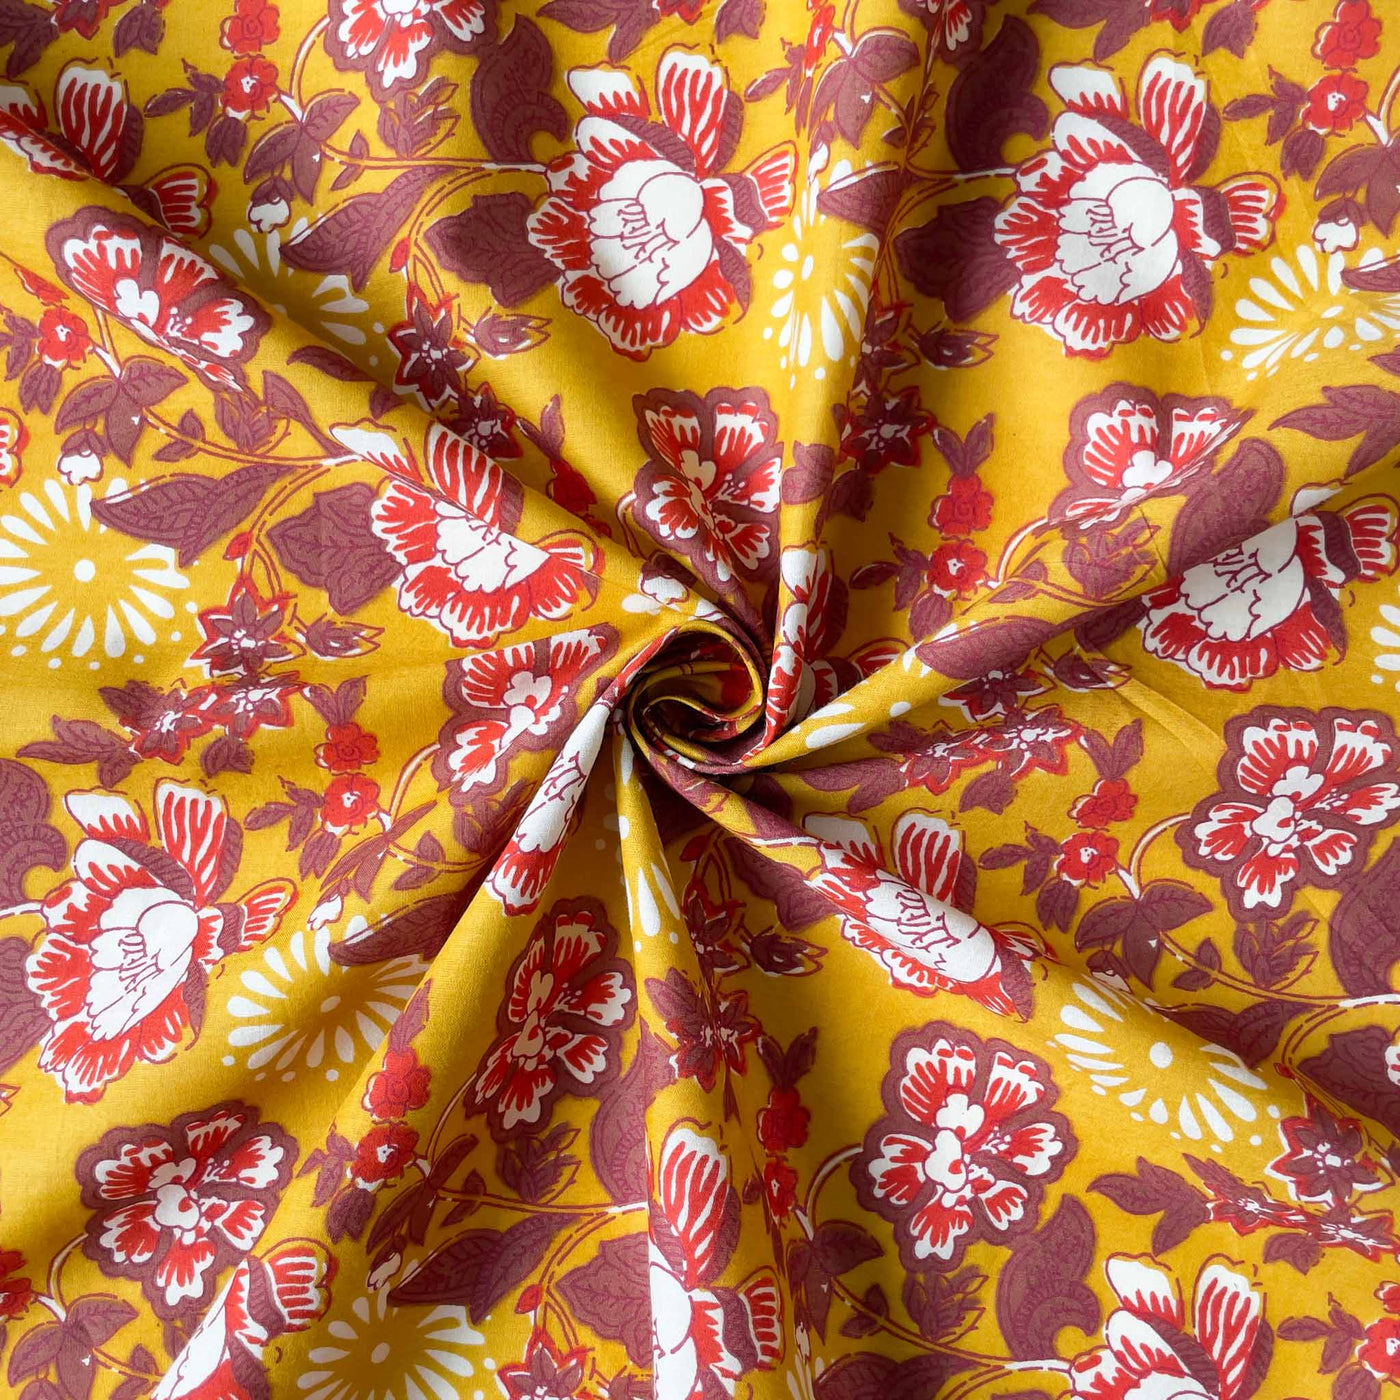 Fabric Pandit Fabric Mustard Yellow & Brown Abstract Floral Screen Printed Pure Cotton Fabric (Width 43 inches)